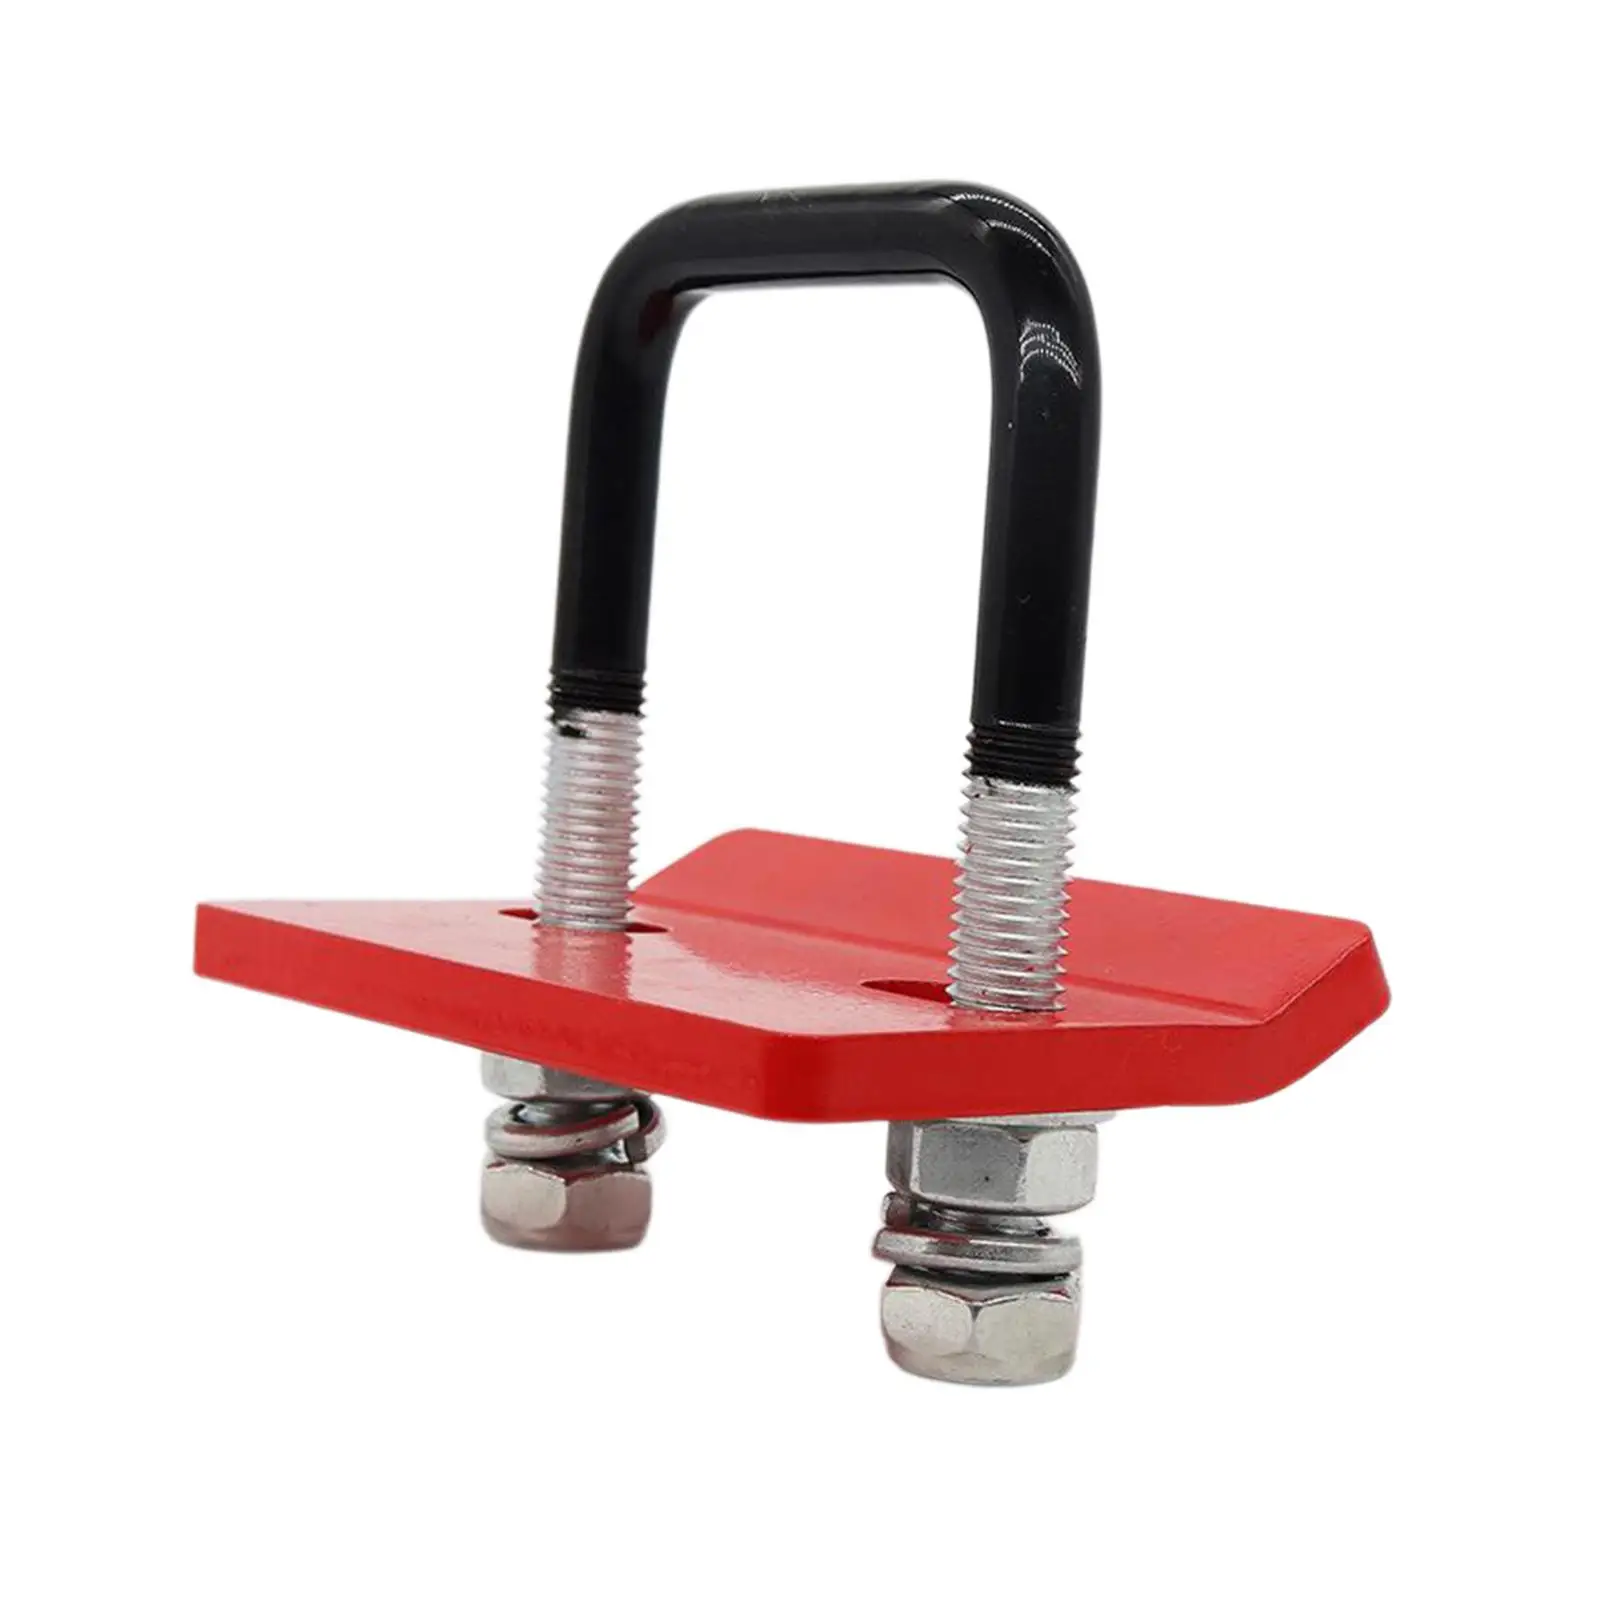 Alloy Steel Hitch Tightener Accessories Anti Rattle Stabilizer Lock Down Tow Clamp for Trailer Ball Mount Bike Rack Hitch Tray